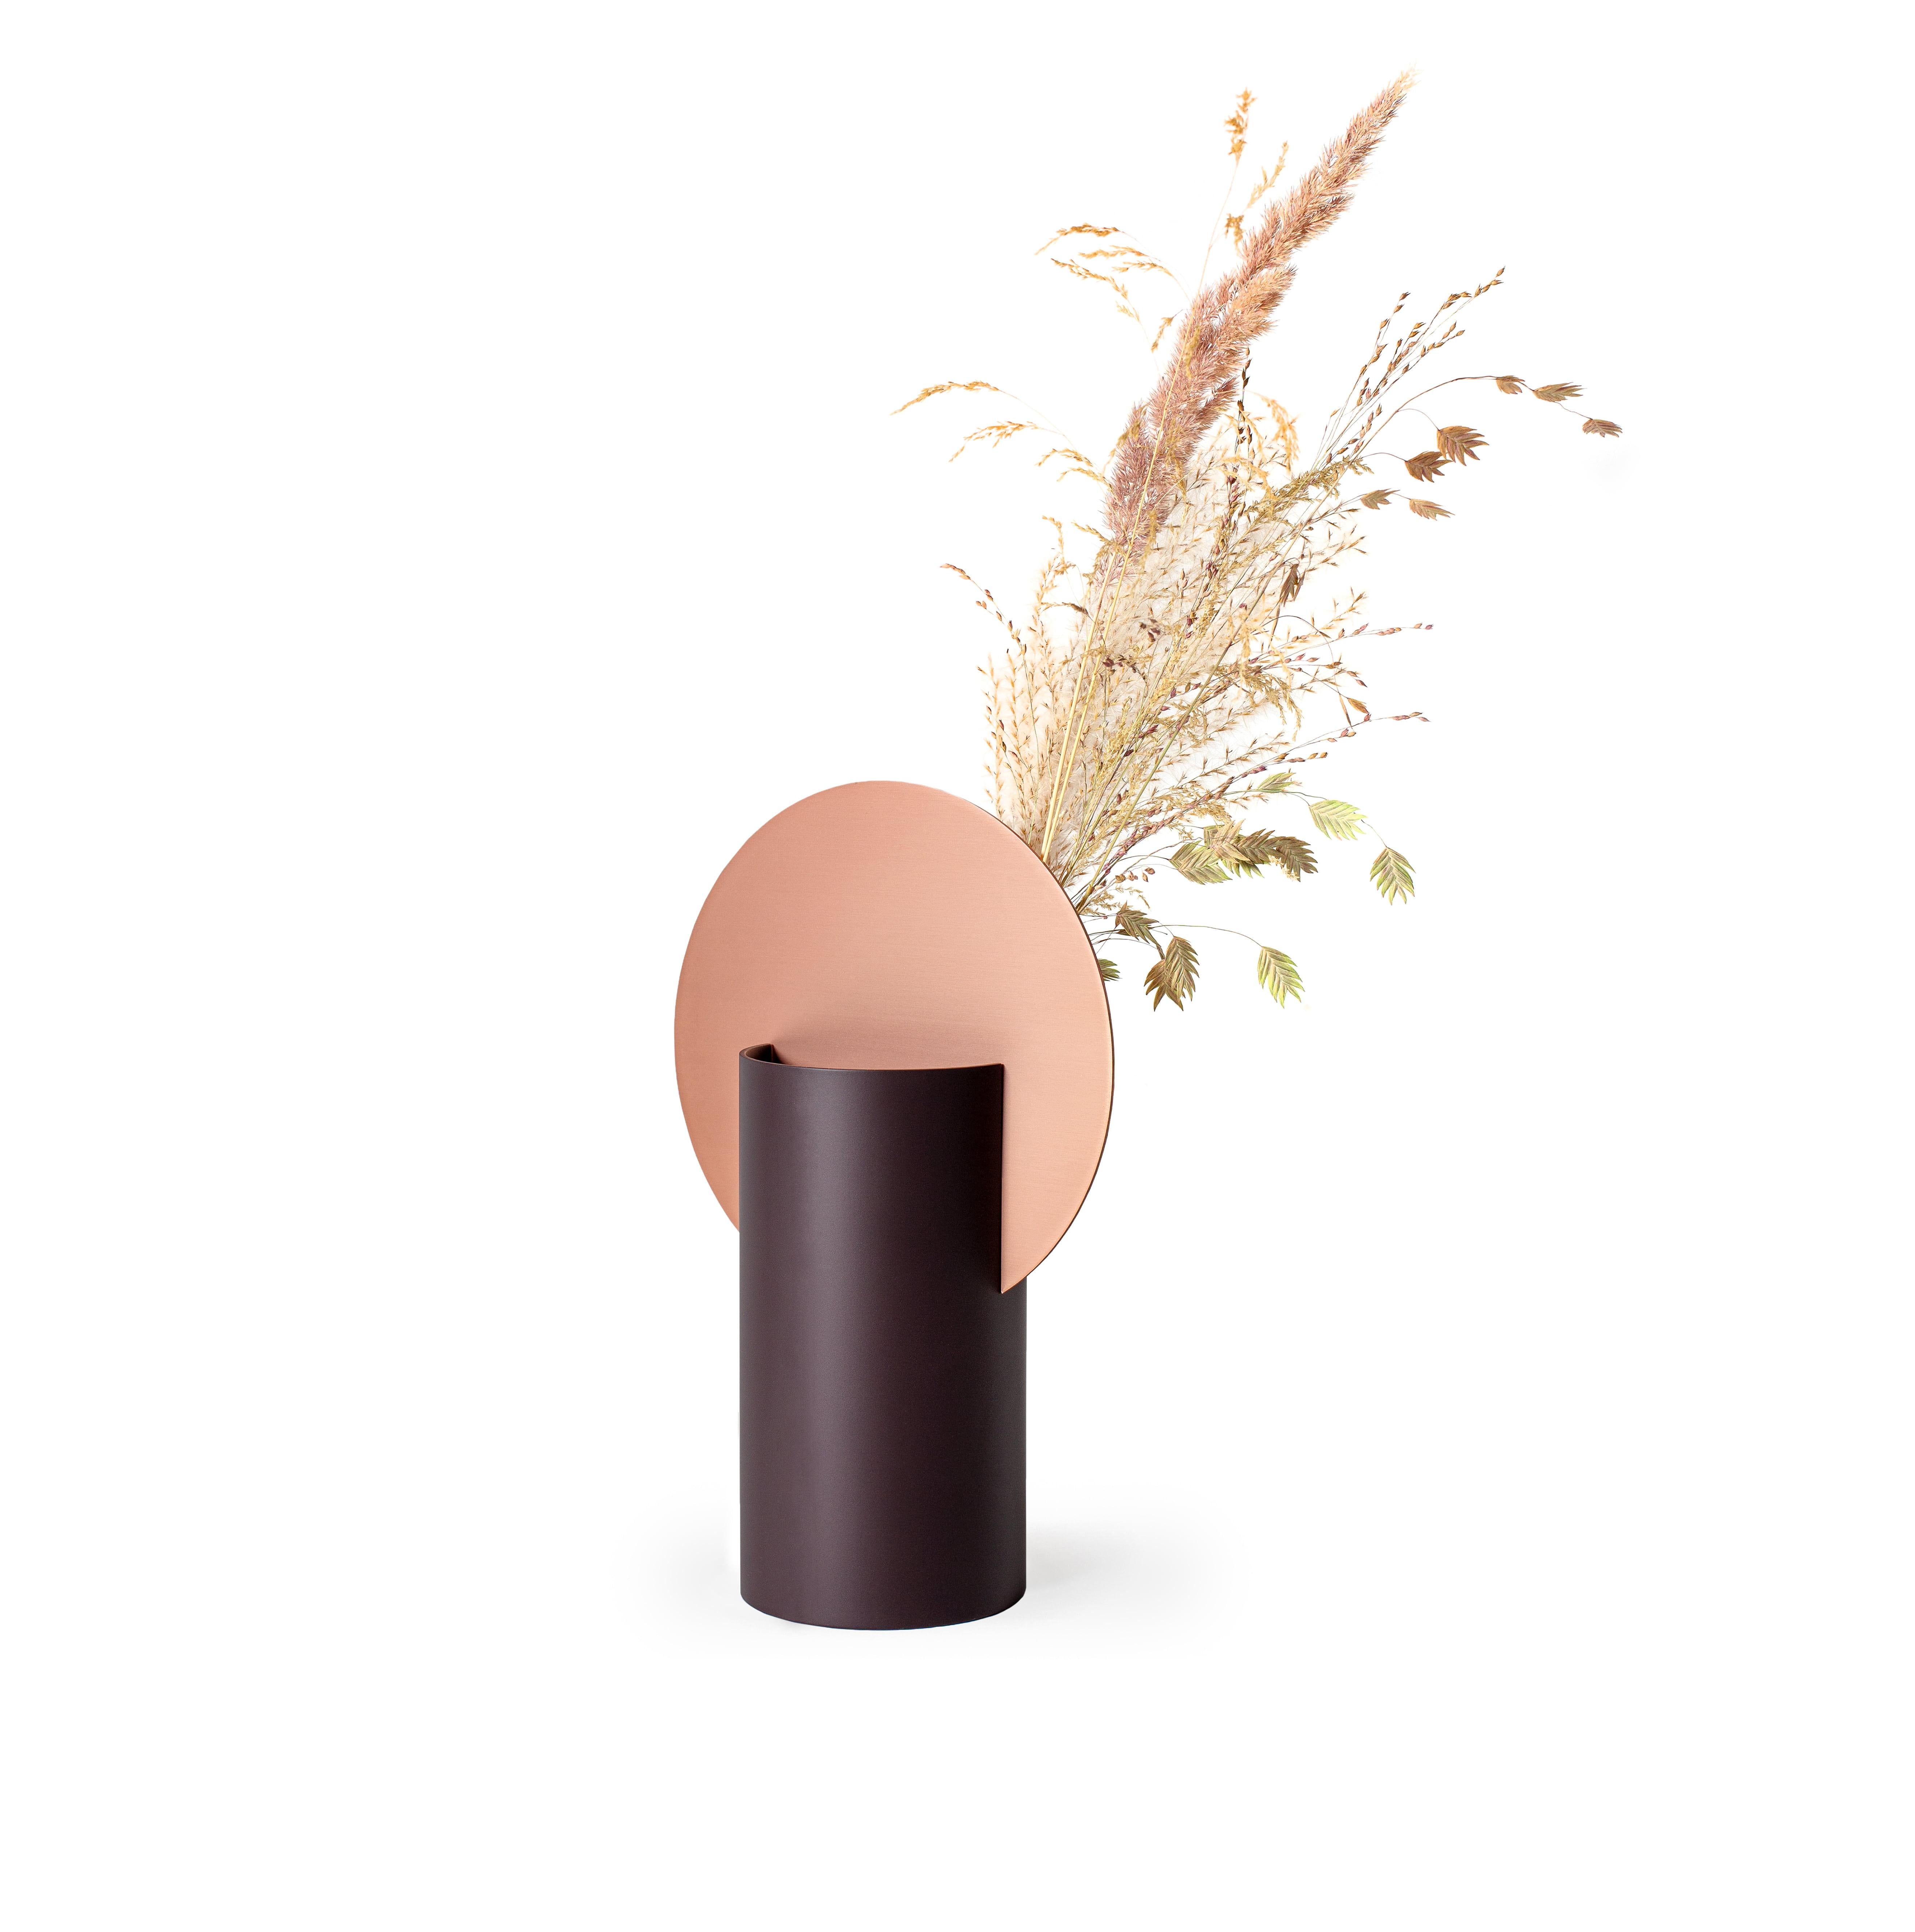 Ukrainian Modern Malevich Vase CS7 by Noom in Copper and Painted Steel